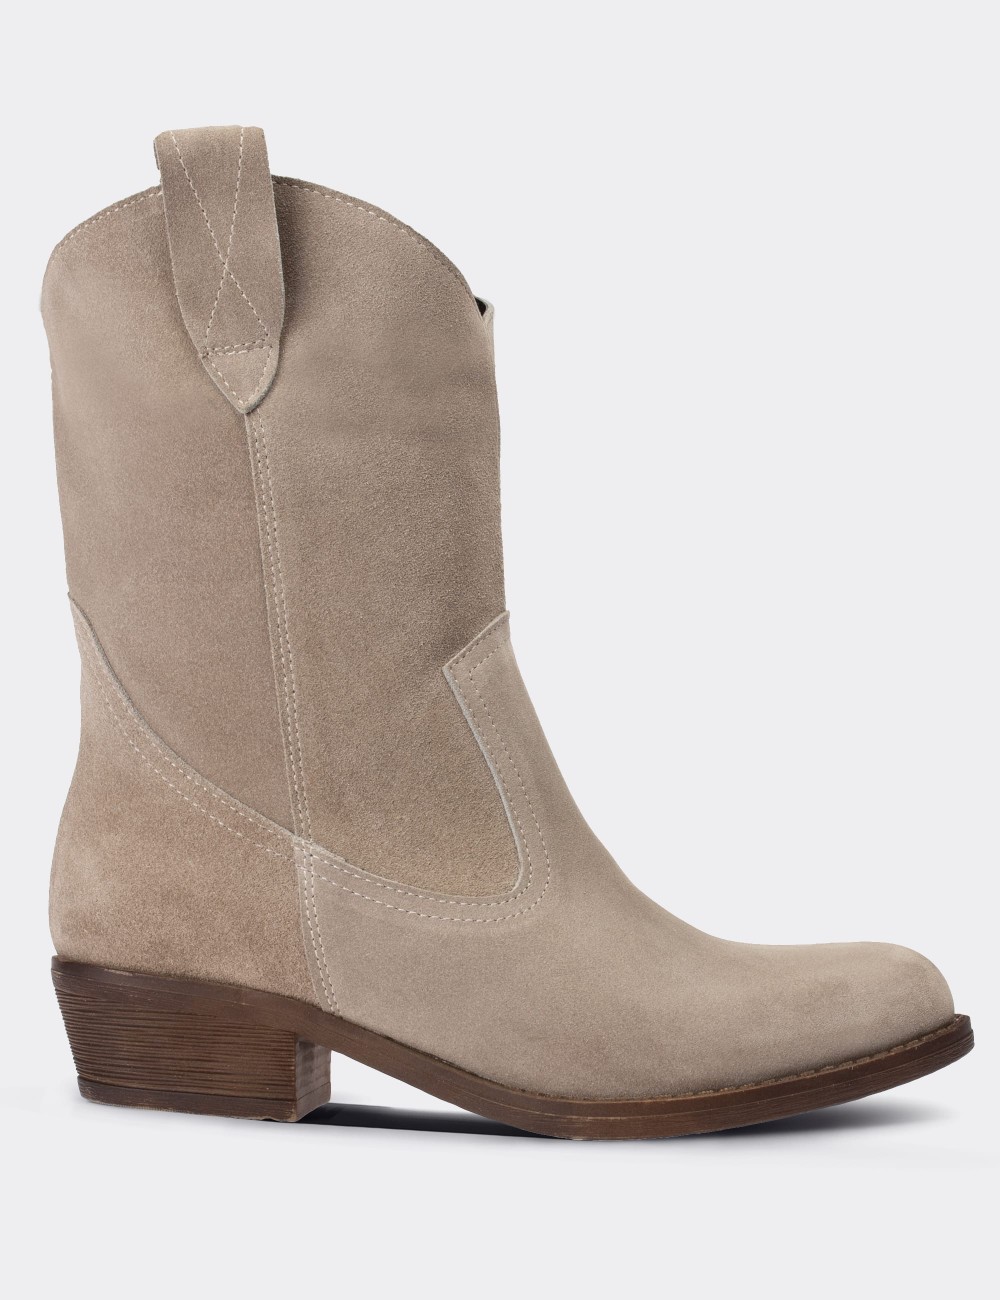 Gray Suede Leather  Boots - E4468ZGRIC01